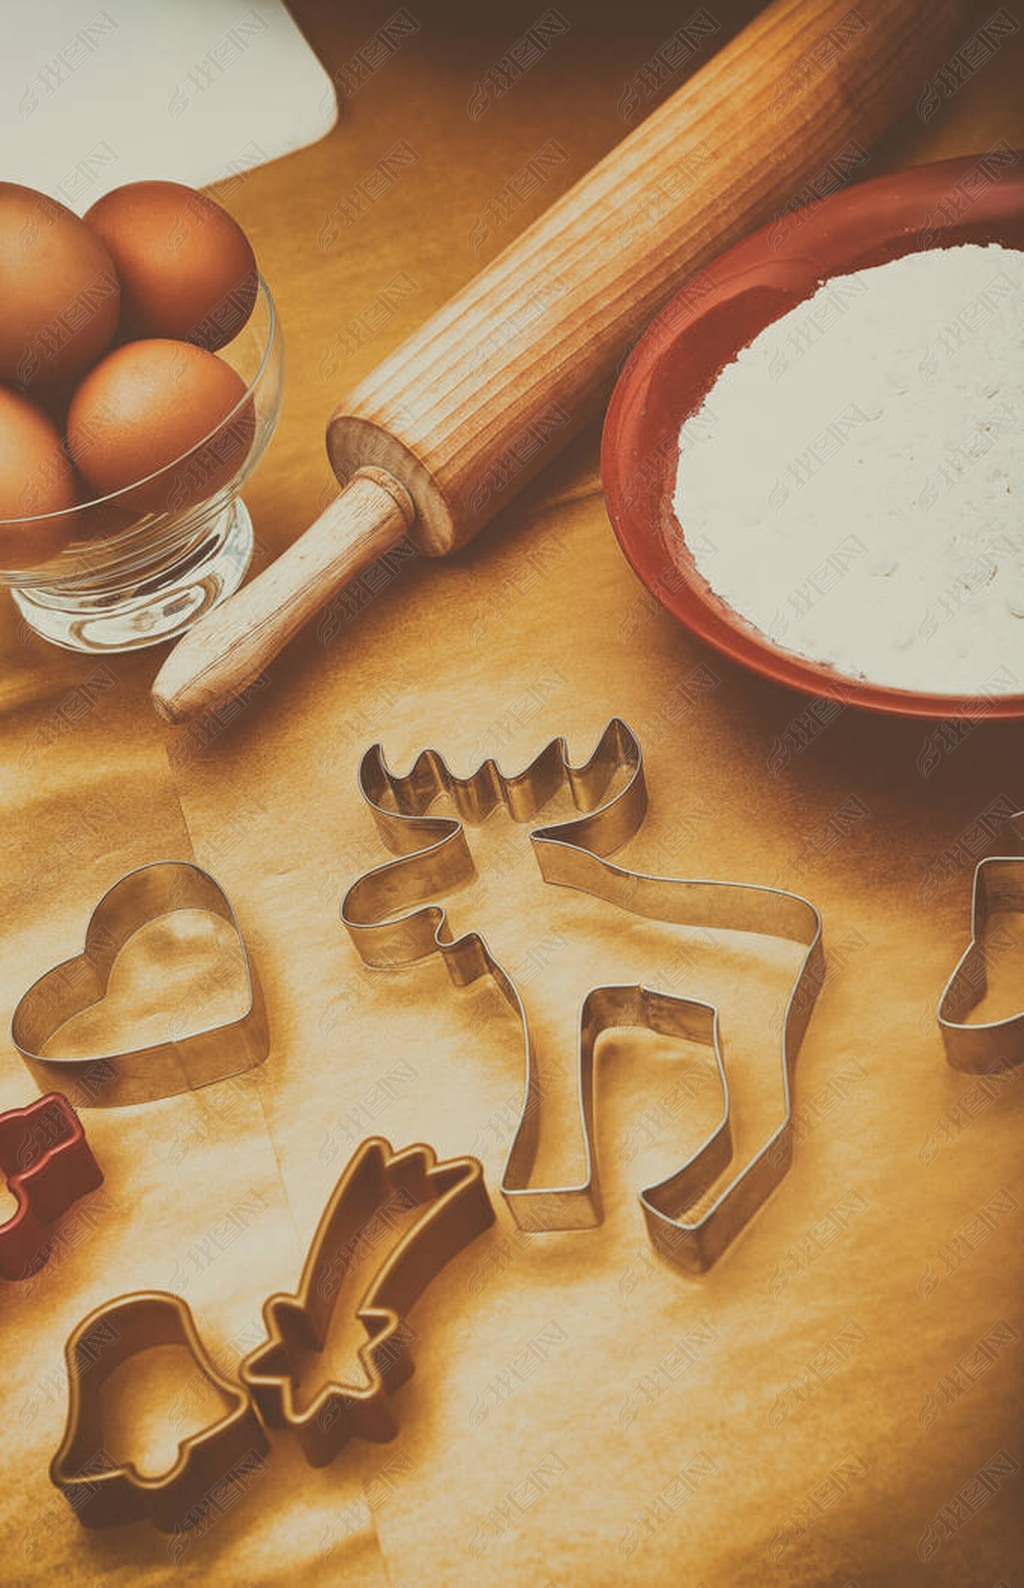 Christmas cookies preparation, different shapes for festive cookies with rolling pin on the wooden t